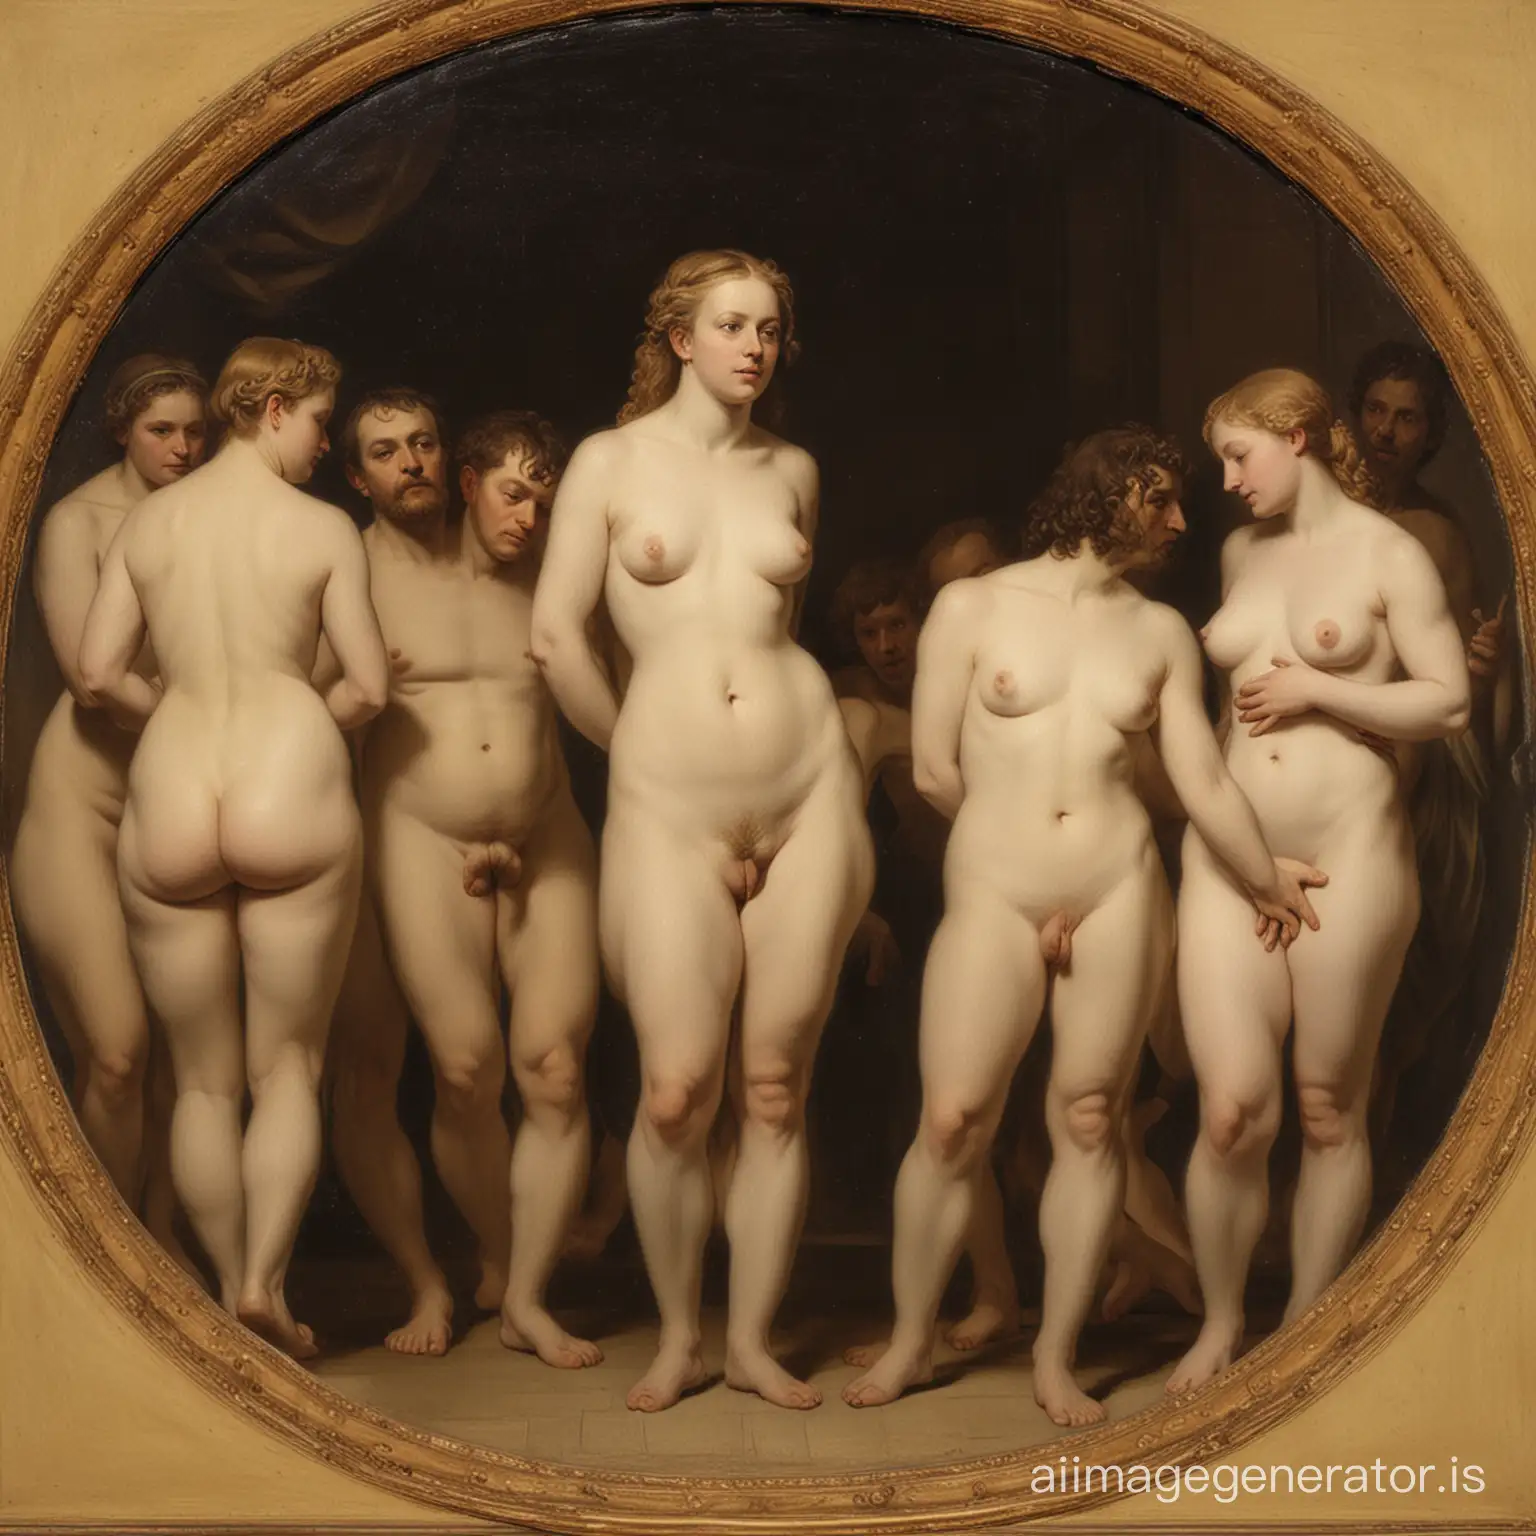 William Blake nude figures in a Rembrandt painting